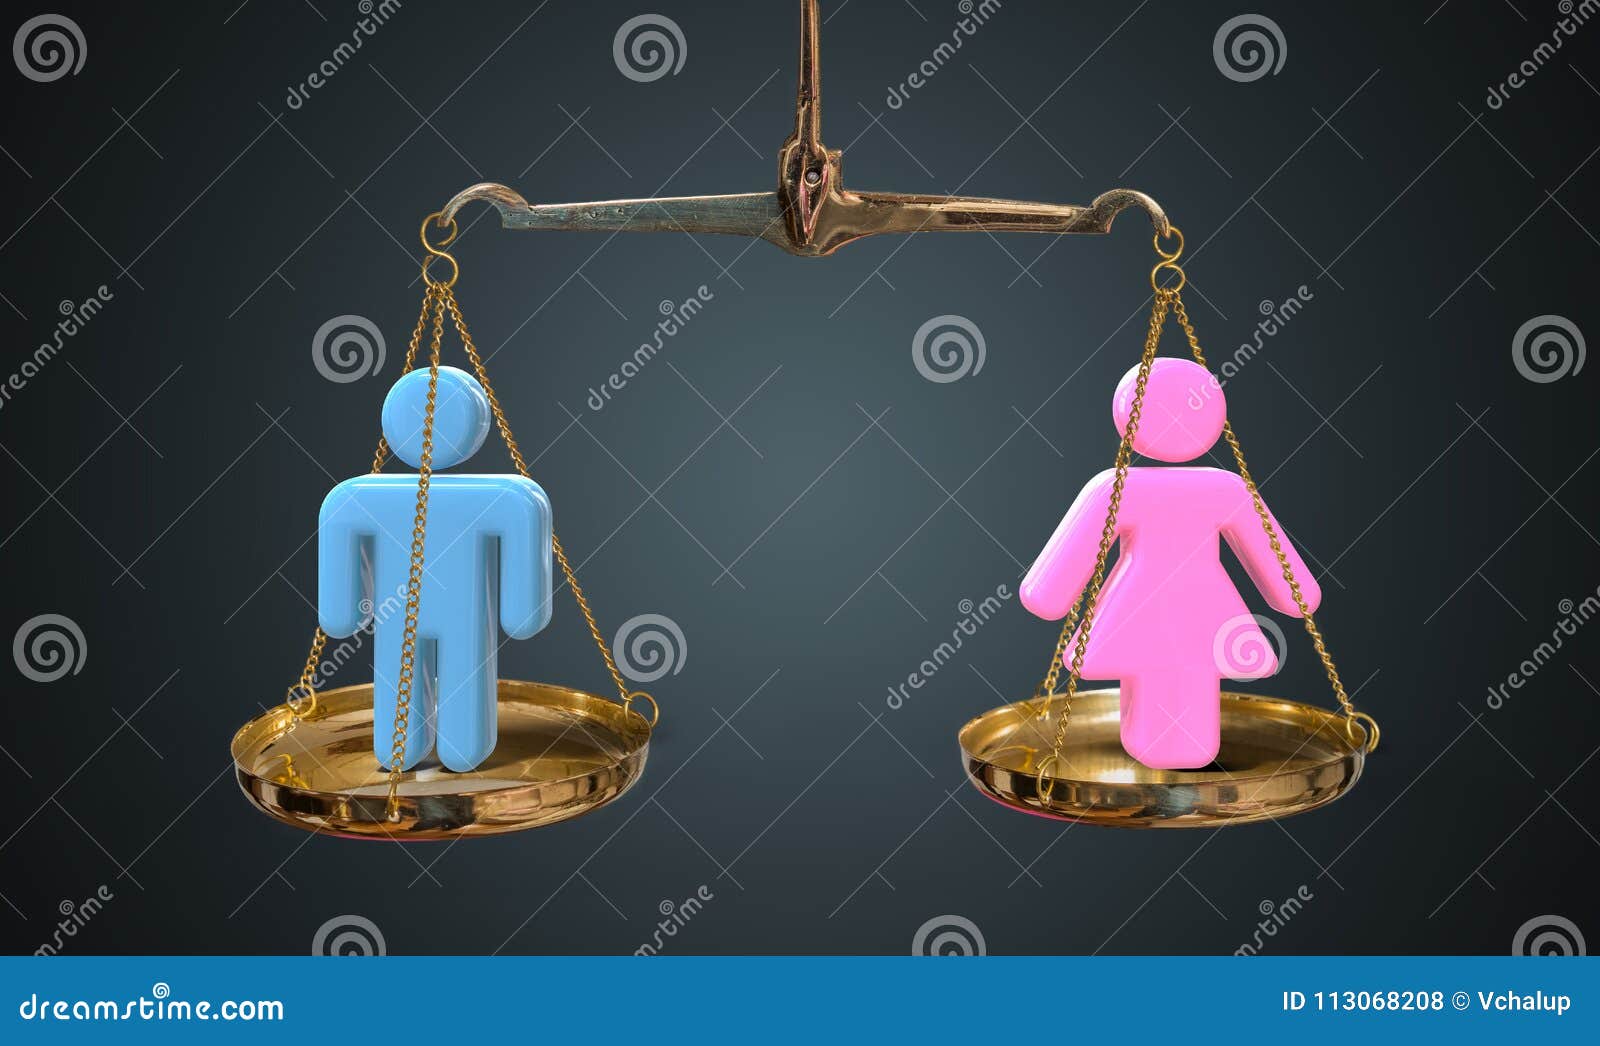 men and women equality concept. scales are comparing men and women